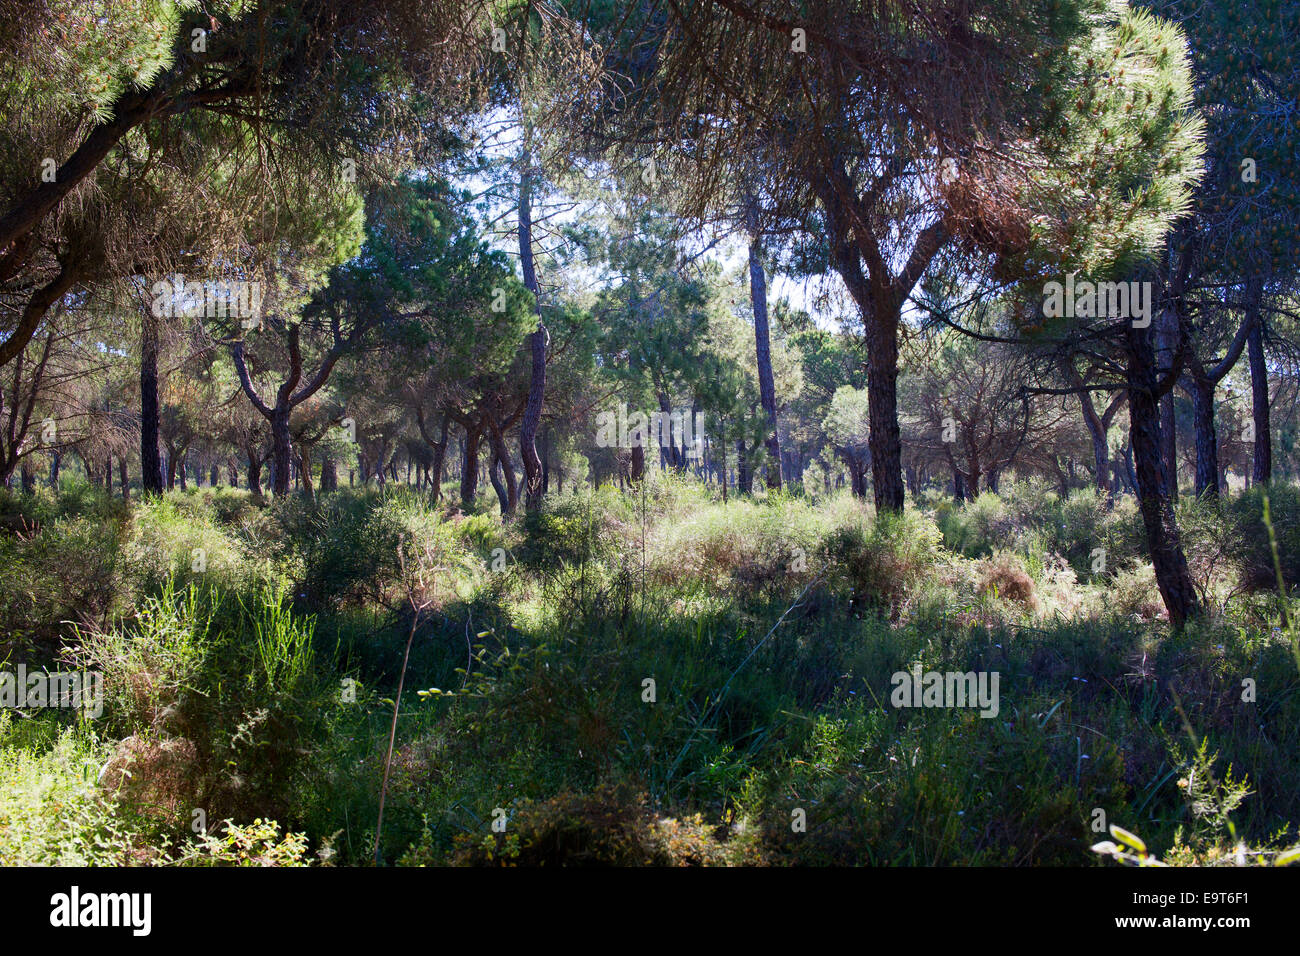 Woodland with a dense understorey, part of the Ria Formosa Nature Park, Algarve, Portugal. Stock Photo